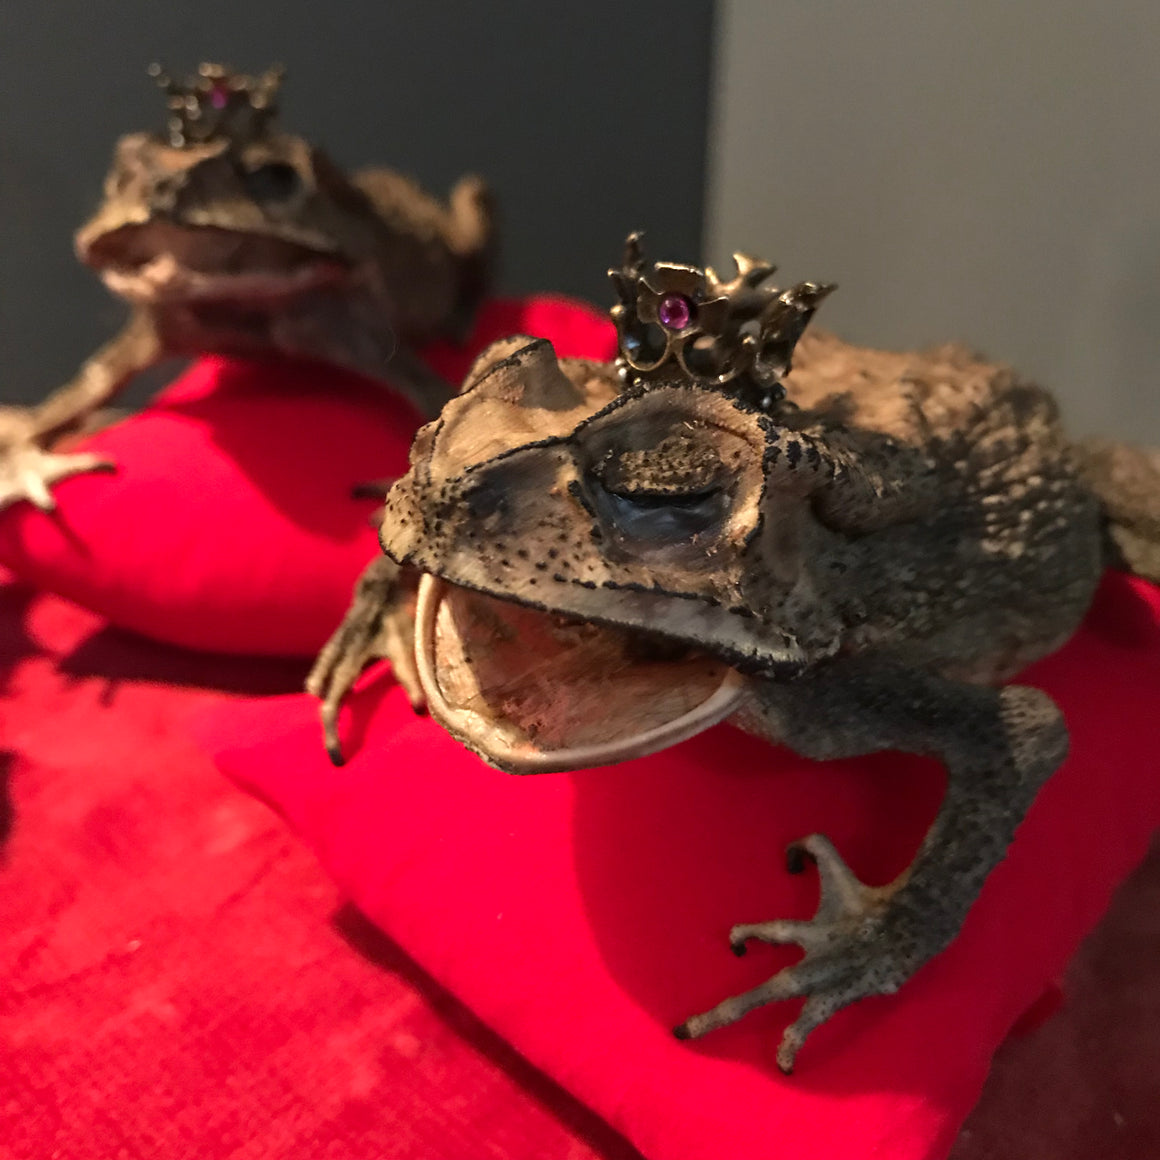 An anthropomorphic taxidermy toad